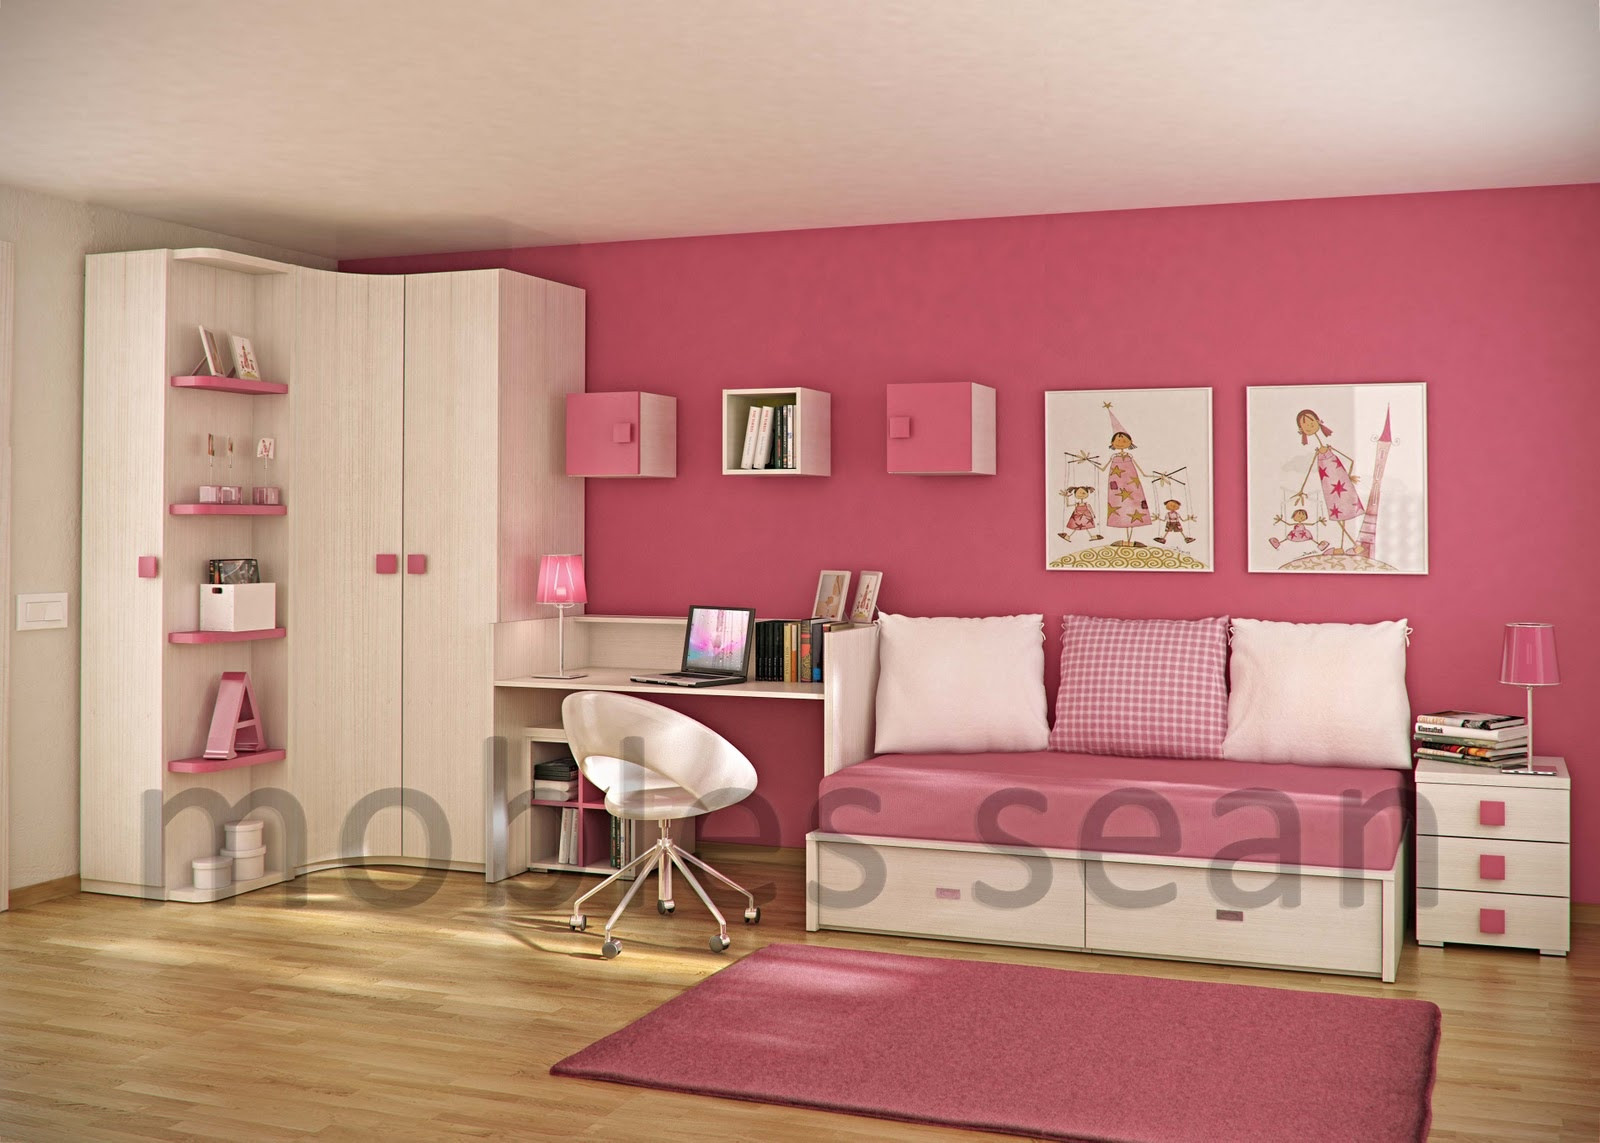 Rooms Design For Kids
 Space Saving Designs for Small Kids Rooms